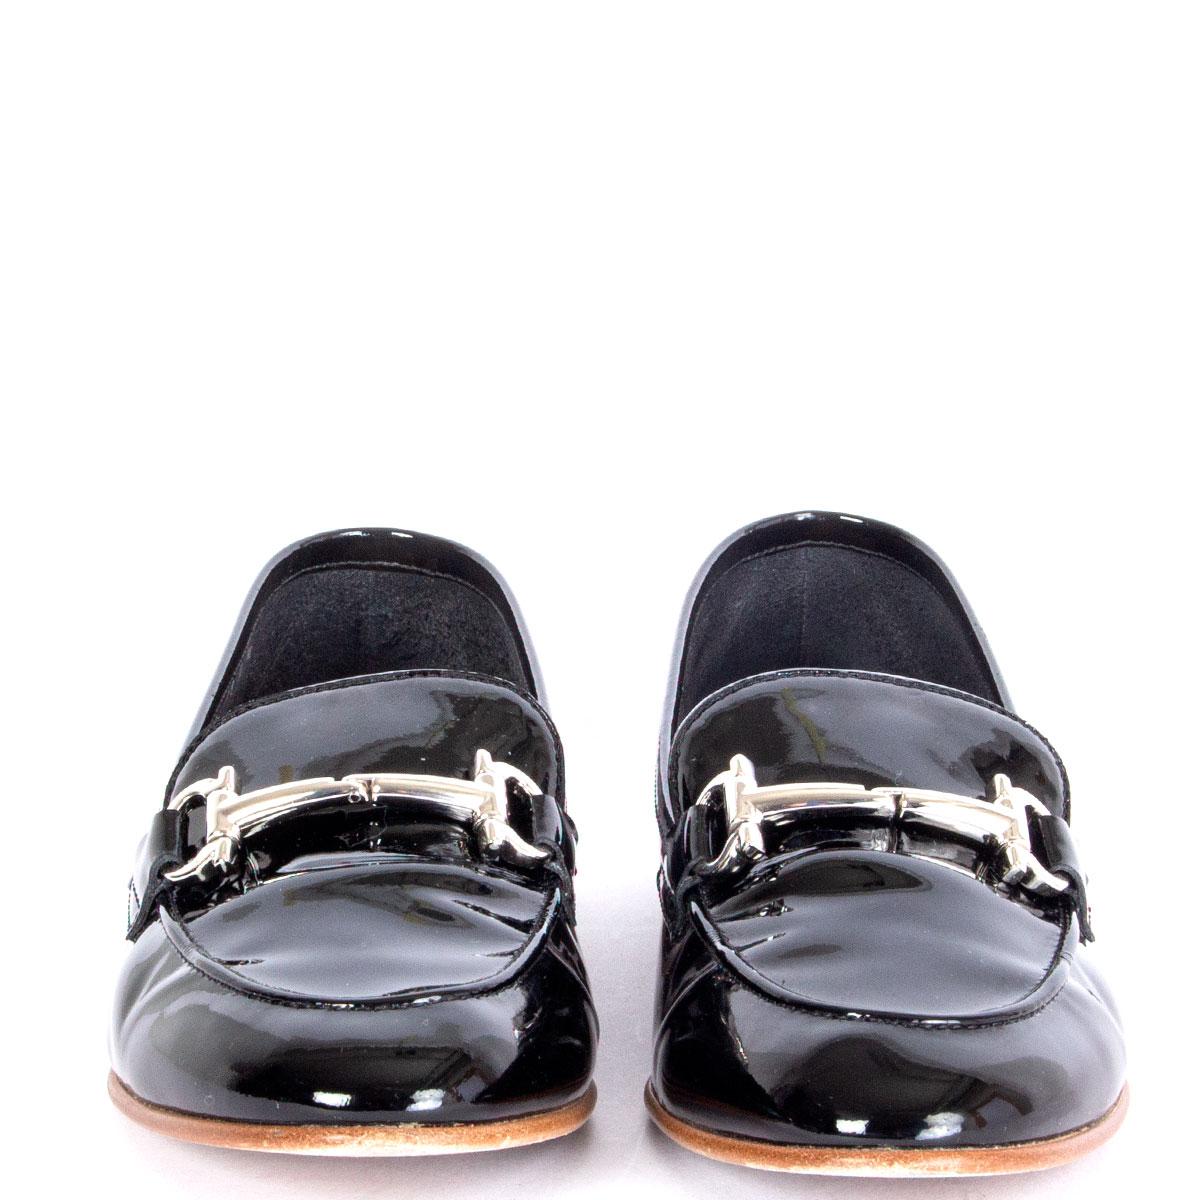 100% authentic Salvatore Ferragamo Informal patent leather black loafers featuring silver-tone horse-bit. Have been worn and are in excellent condition. 

Imprinted Size	37.5
Shoe Size	37.5
Inside Sole	24.5cm (9.6in)
Width	7.5cm (2.9in)
Heel	1cm